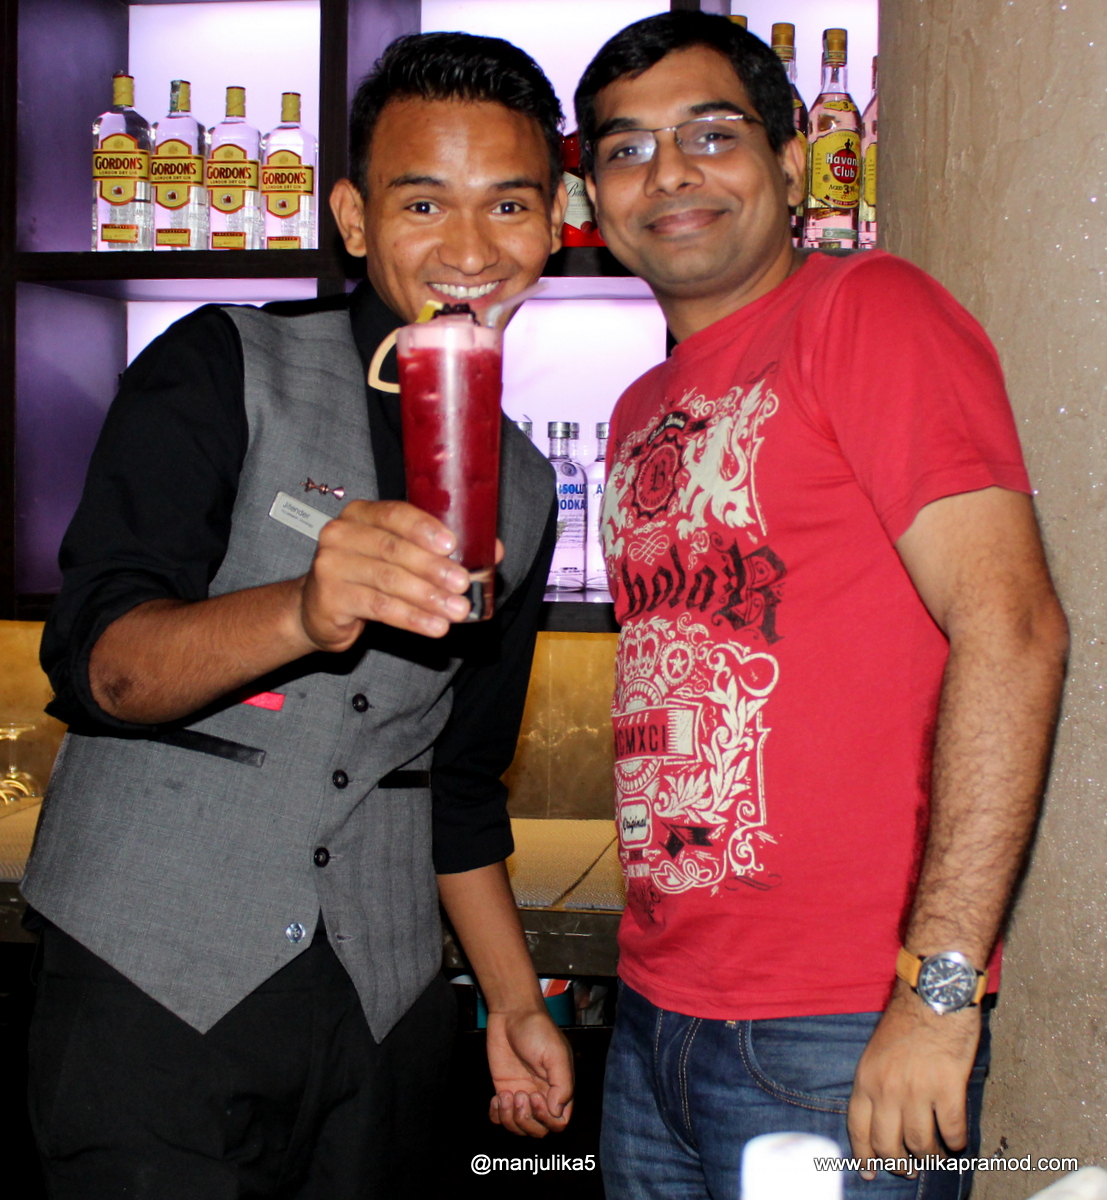 When I Attended The Vivo HiFi Night, Westin Bartending Academy And The Food Mela